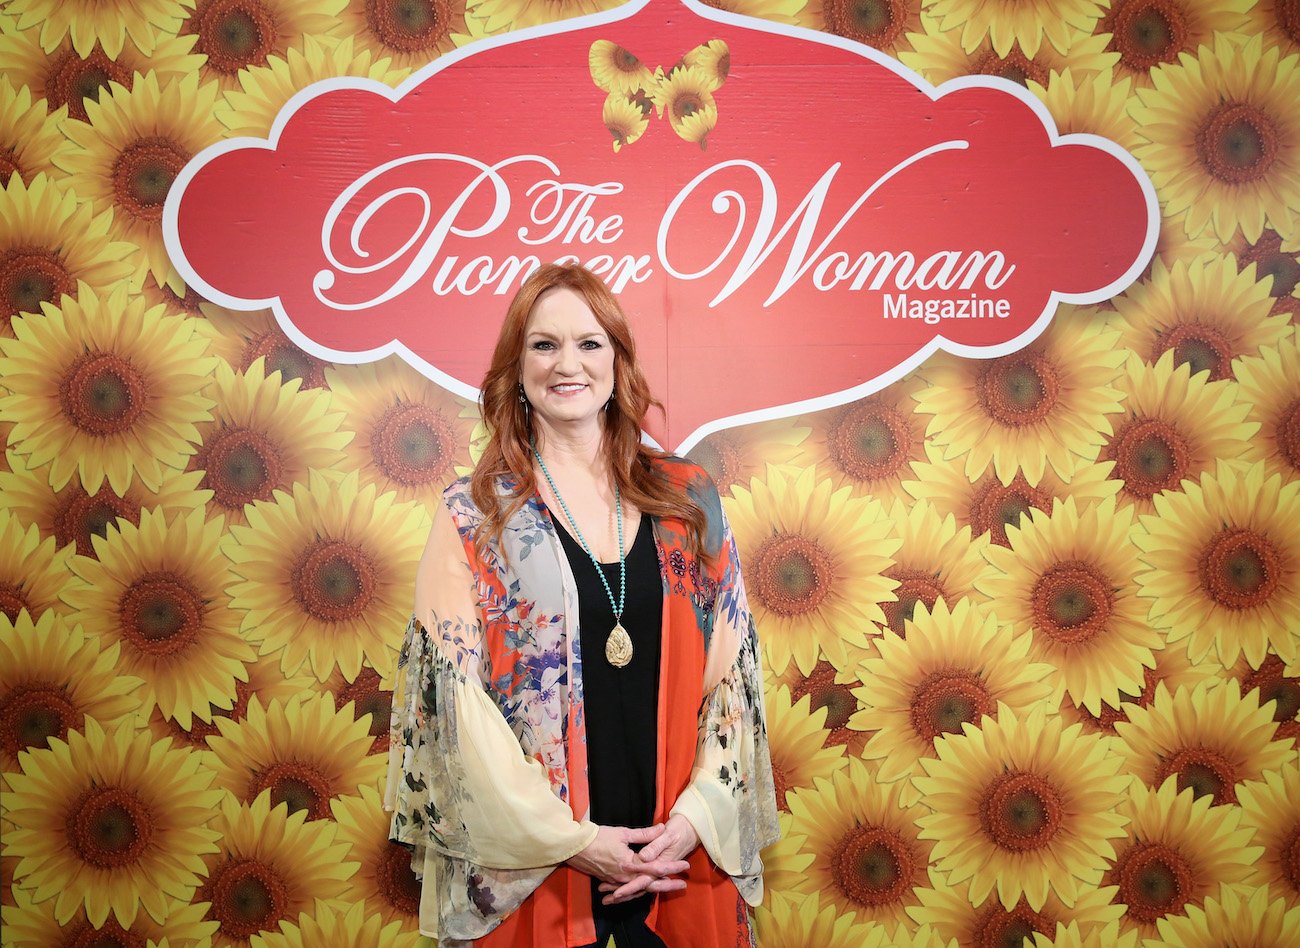 Ree Drummond smiles and wears a flowing bright top while standing in front of a yellow sunflower wall